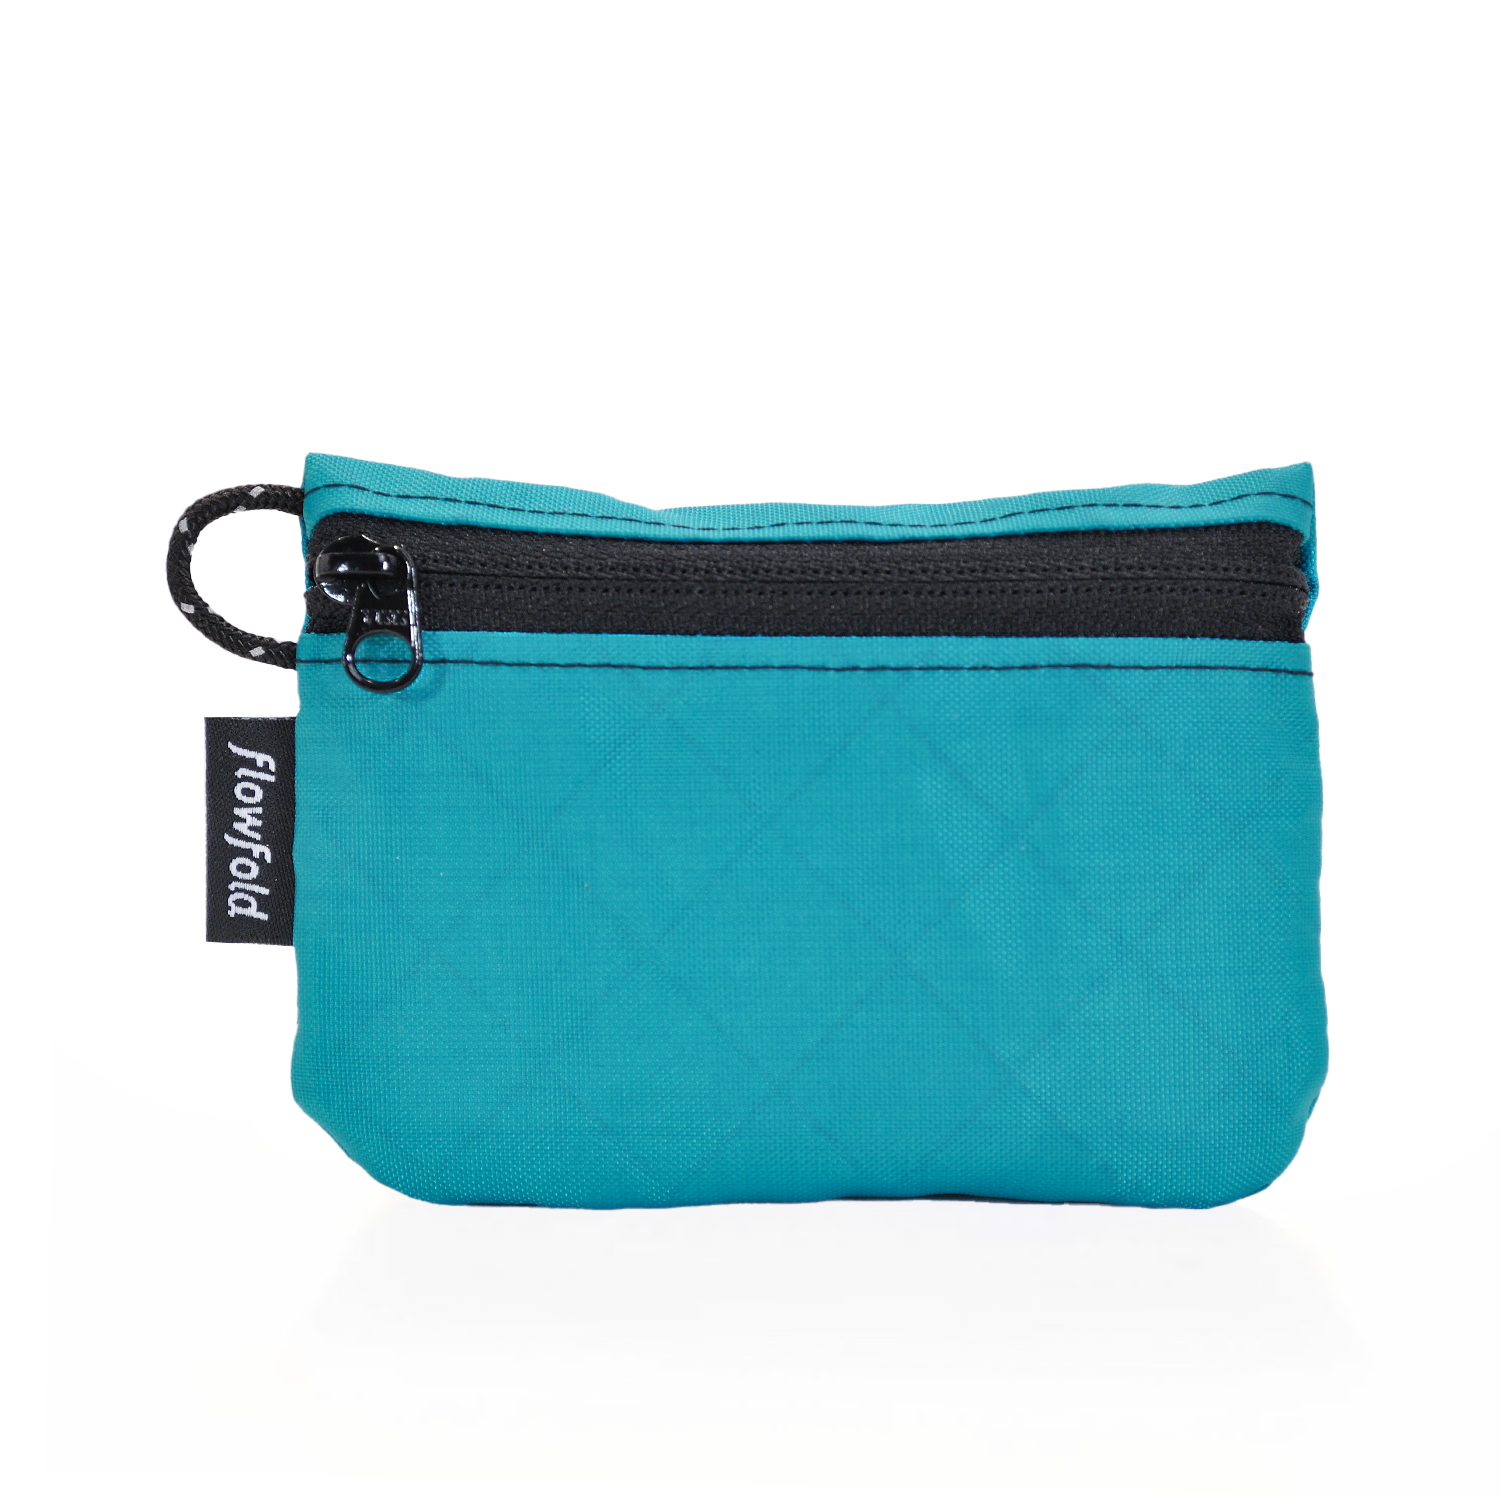 Flowfold Recycled Aqua Essentialist Coin Pouch Wallet For Cash, Cards, and Coins Made in USA, Maine by Flowfold